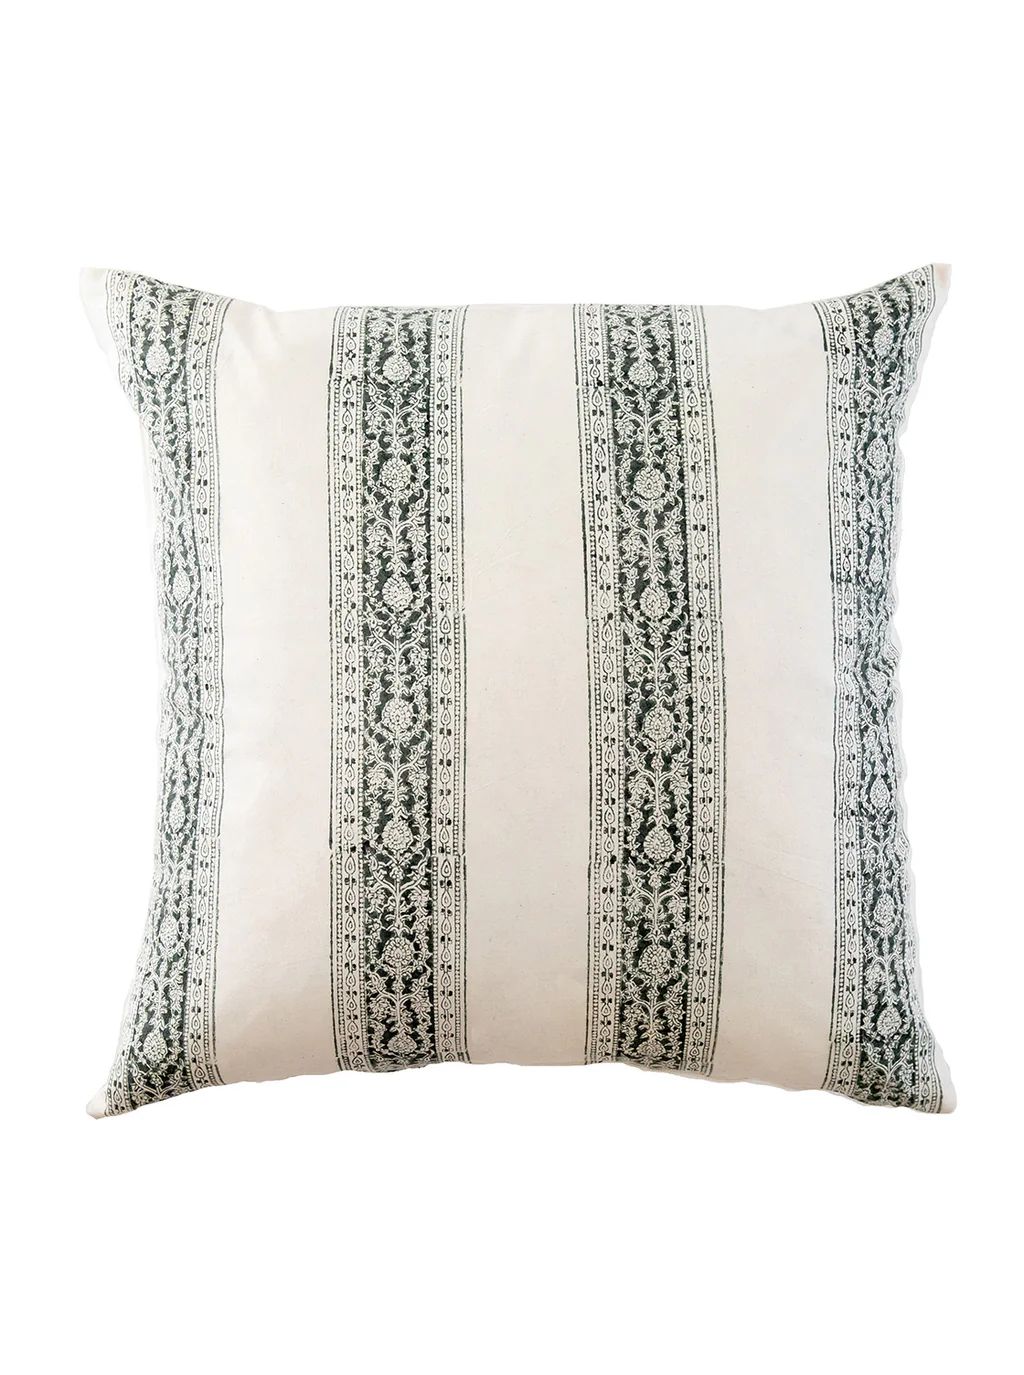 Andrew Pillow | House of Jade Home